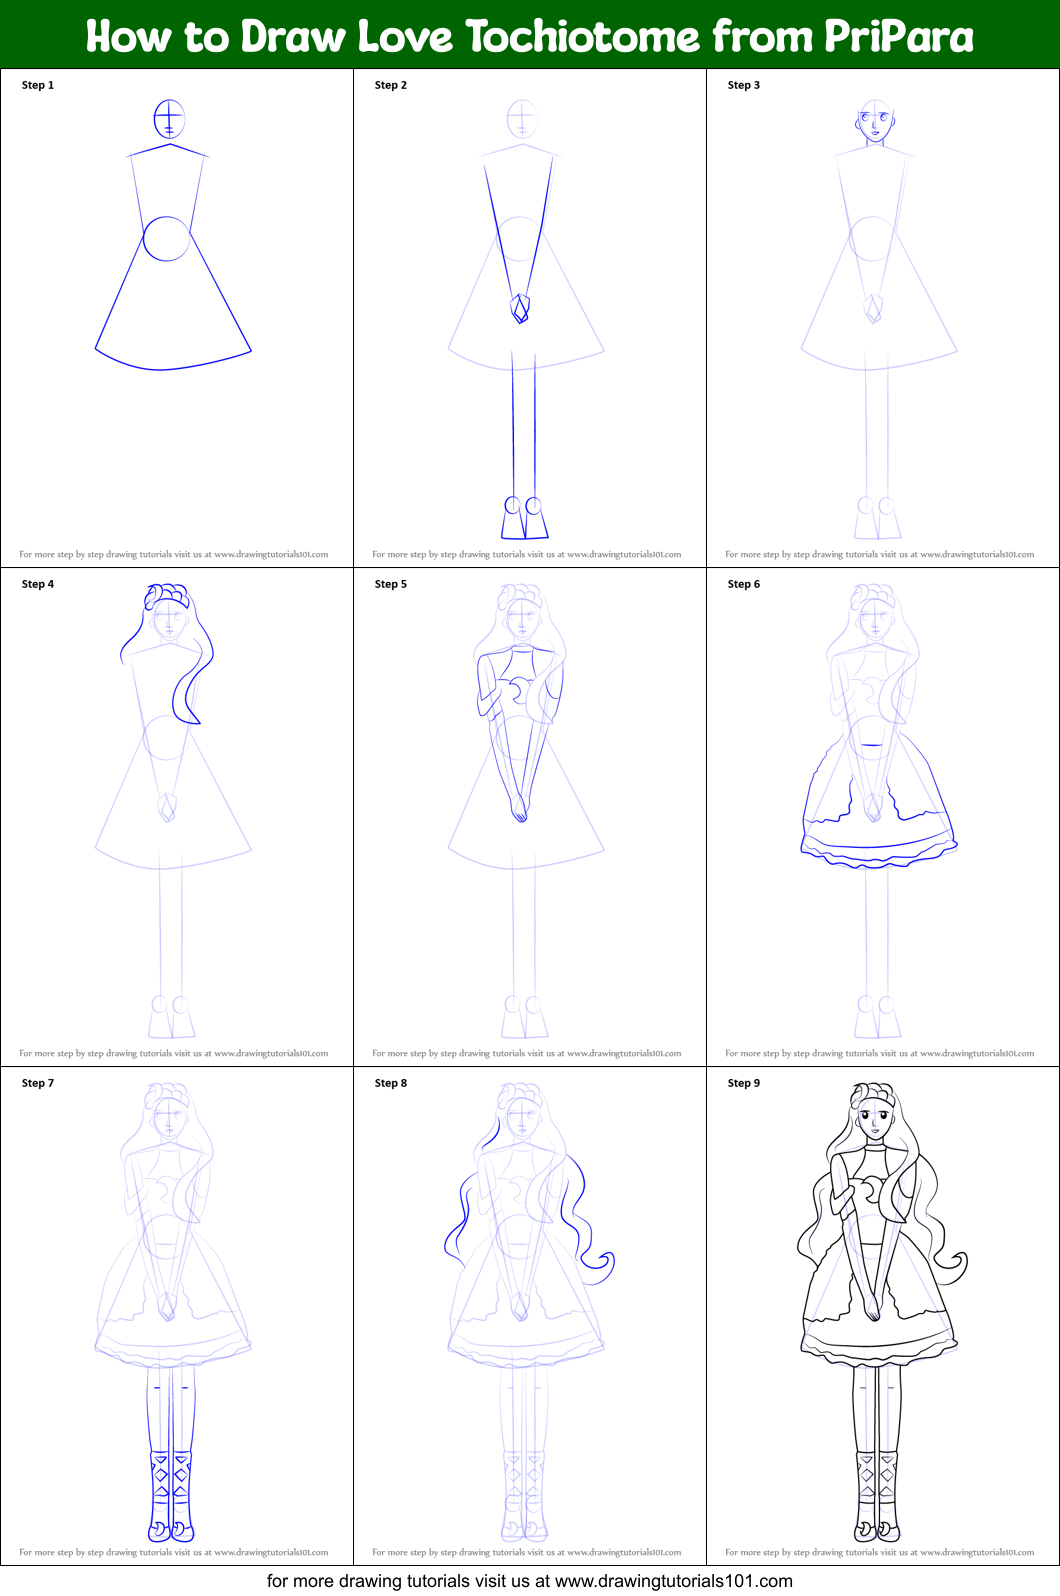 How to Draw Love Tochiotome from PriPara printable by step sheet :